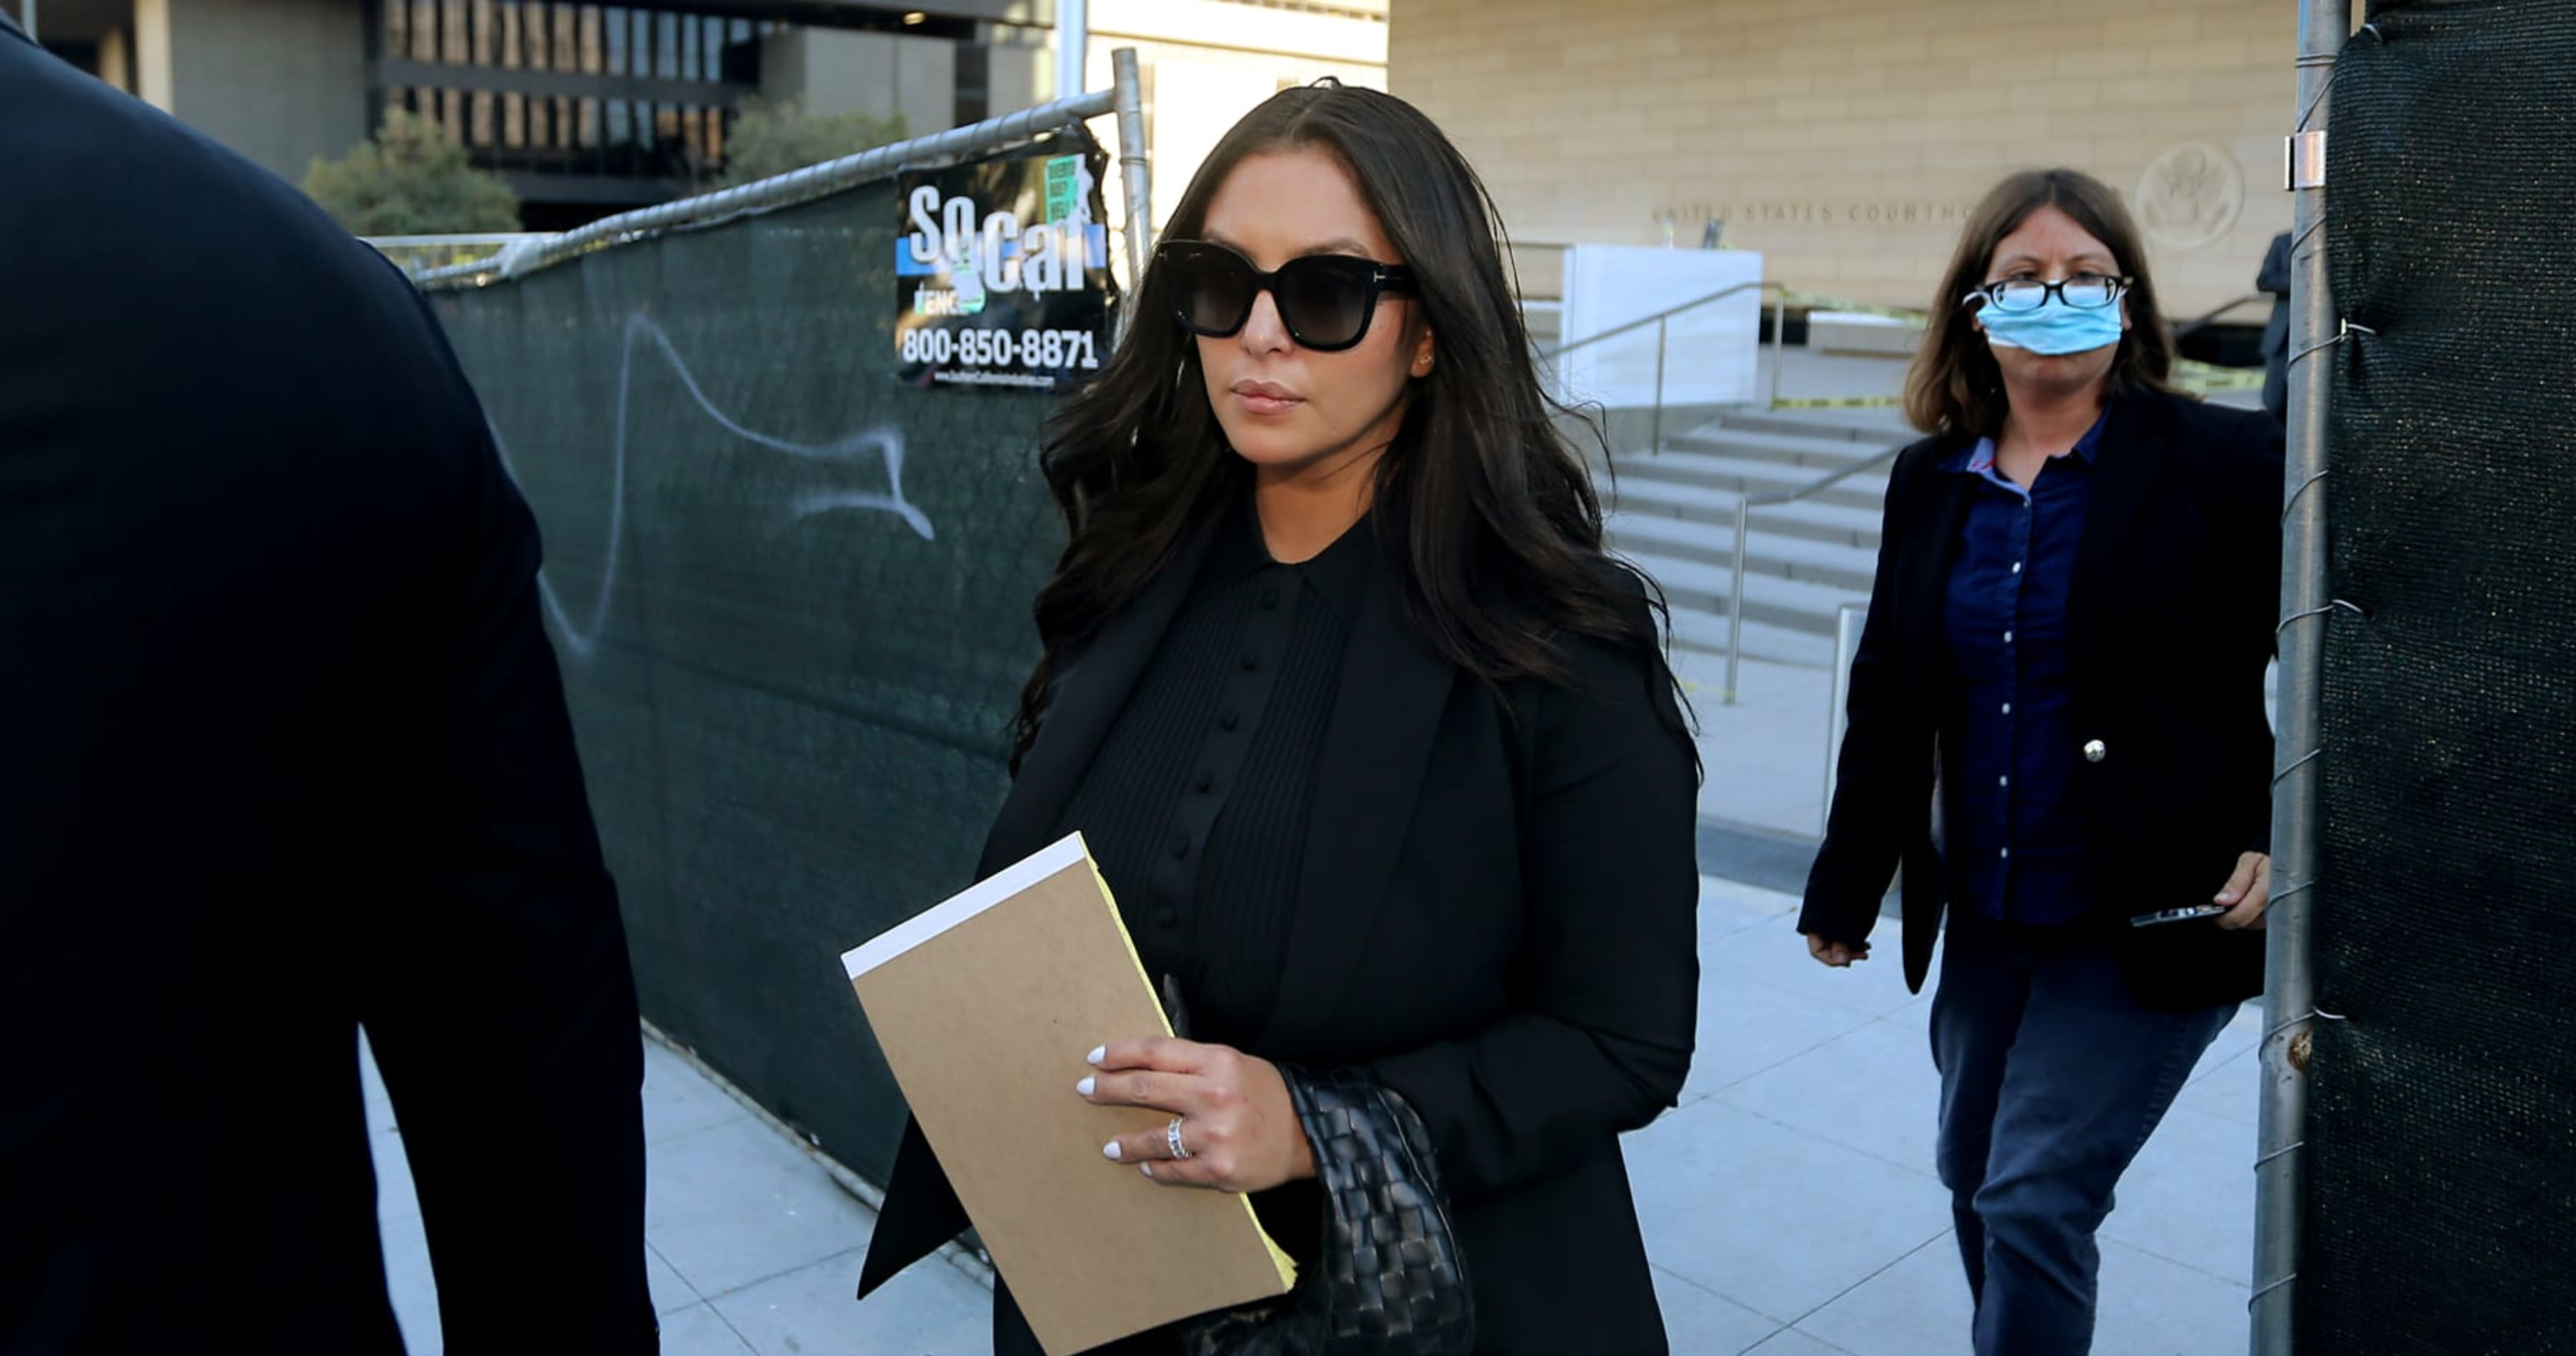 Vanessa Bryant Awarded $16M in Kobe Crash Photo Lawsuit Against L.A. County